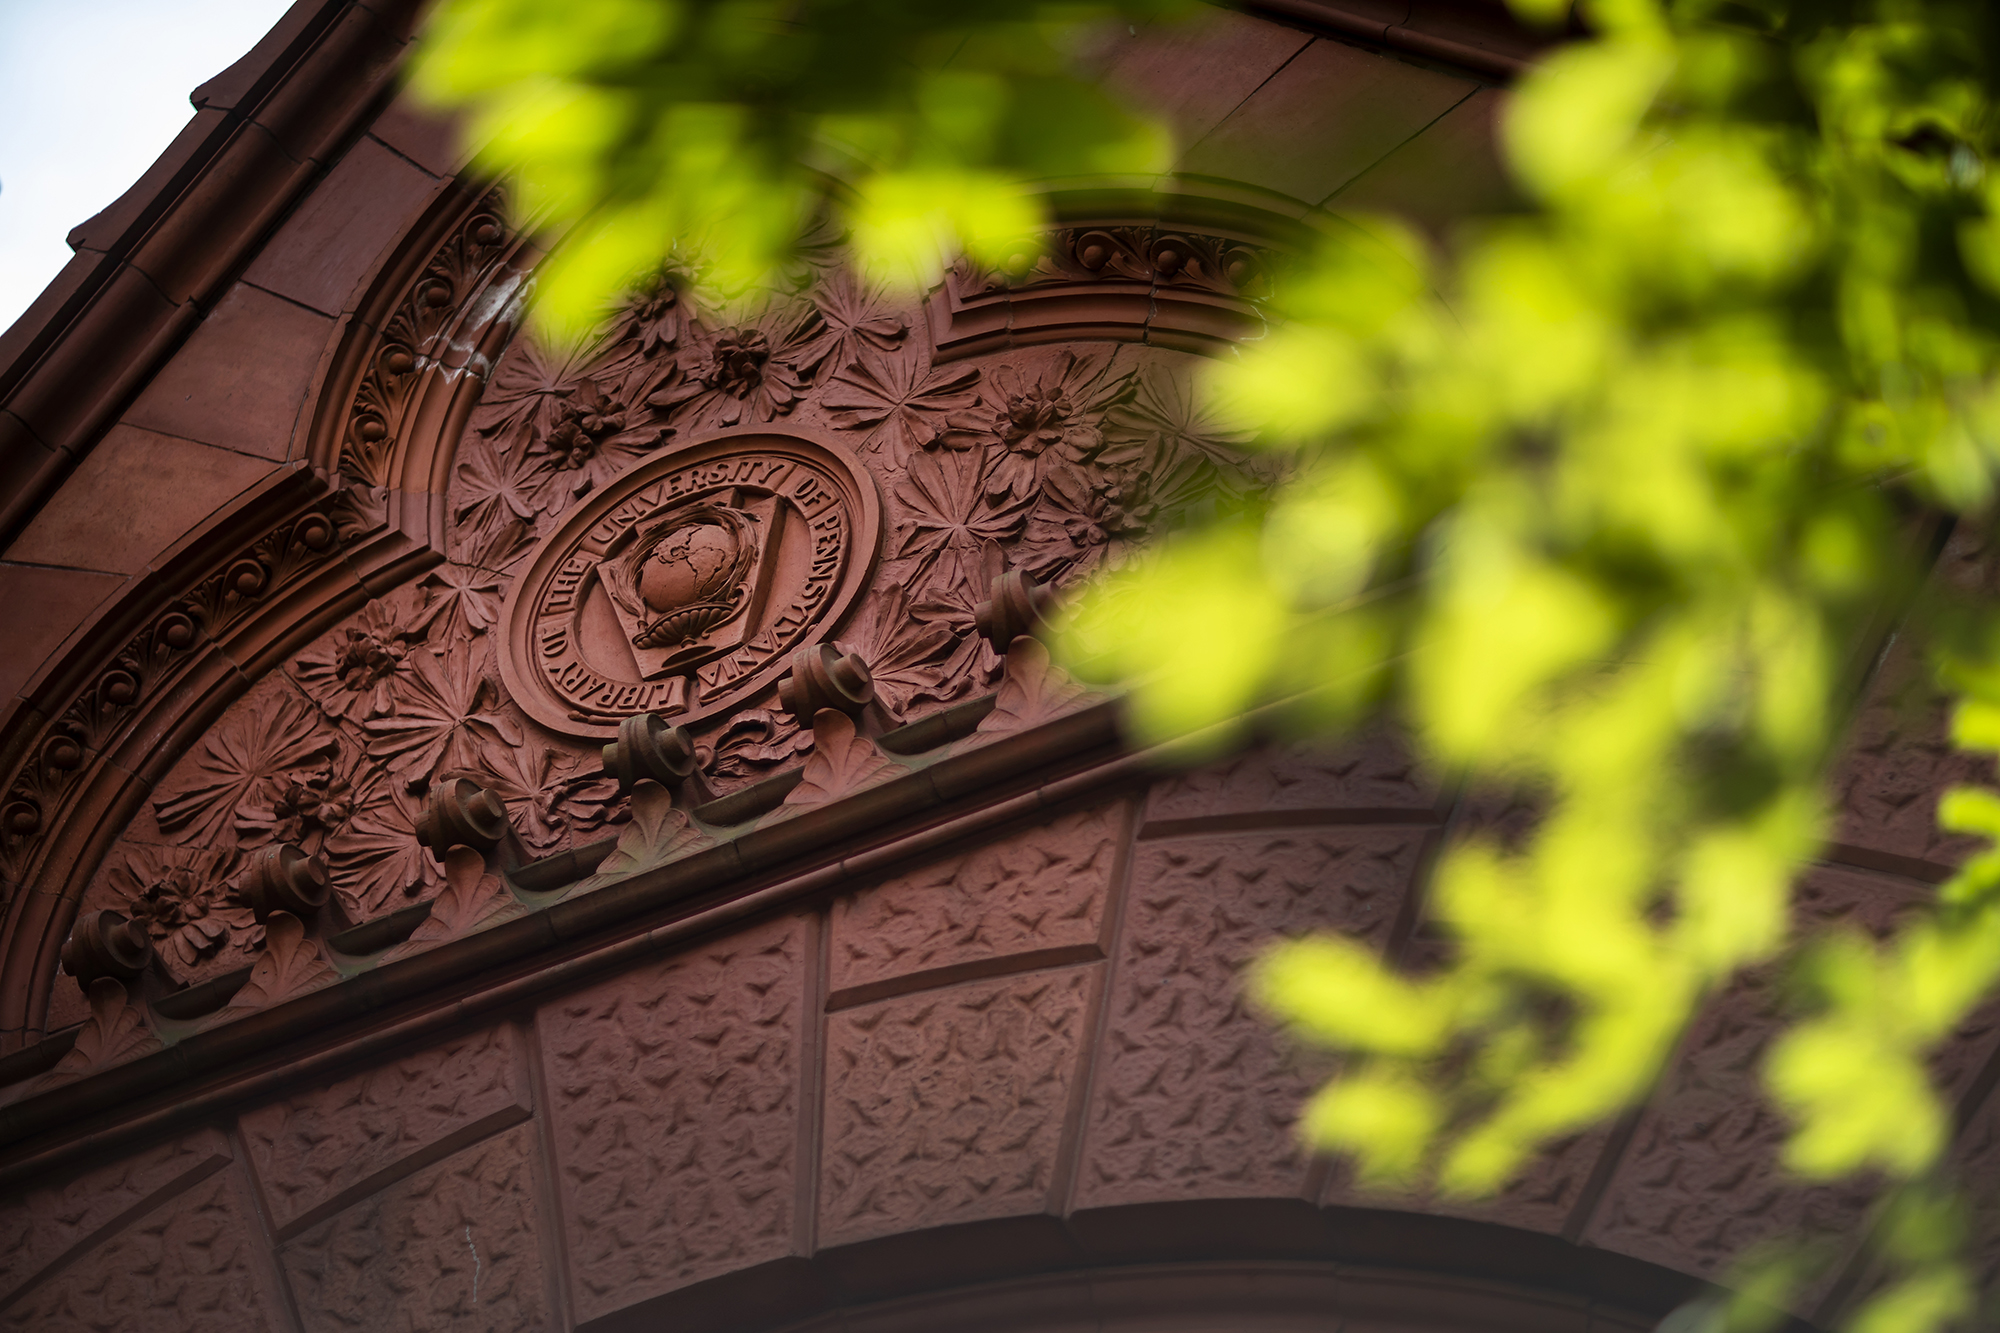 An early version of the University seal rendered in terracotta above the entrance to the Fisher Fine Arts Library